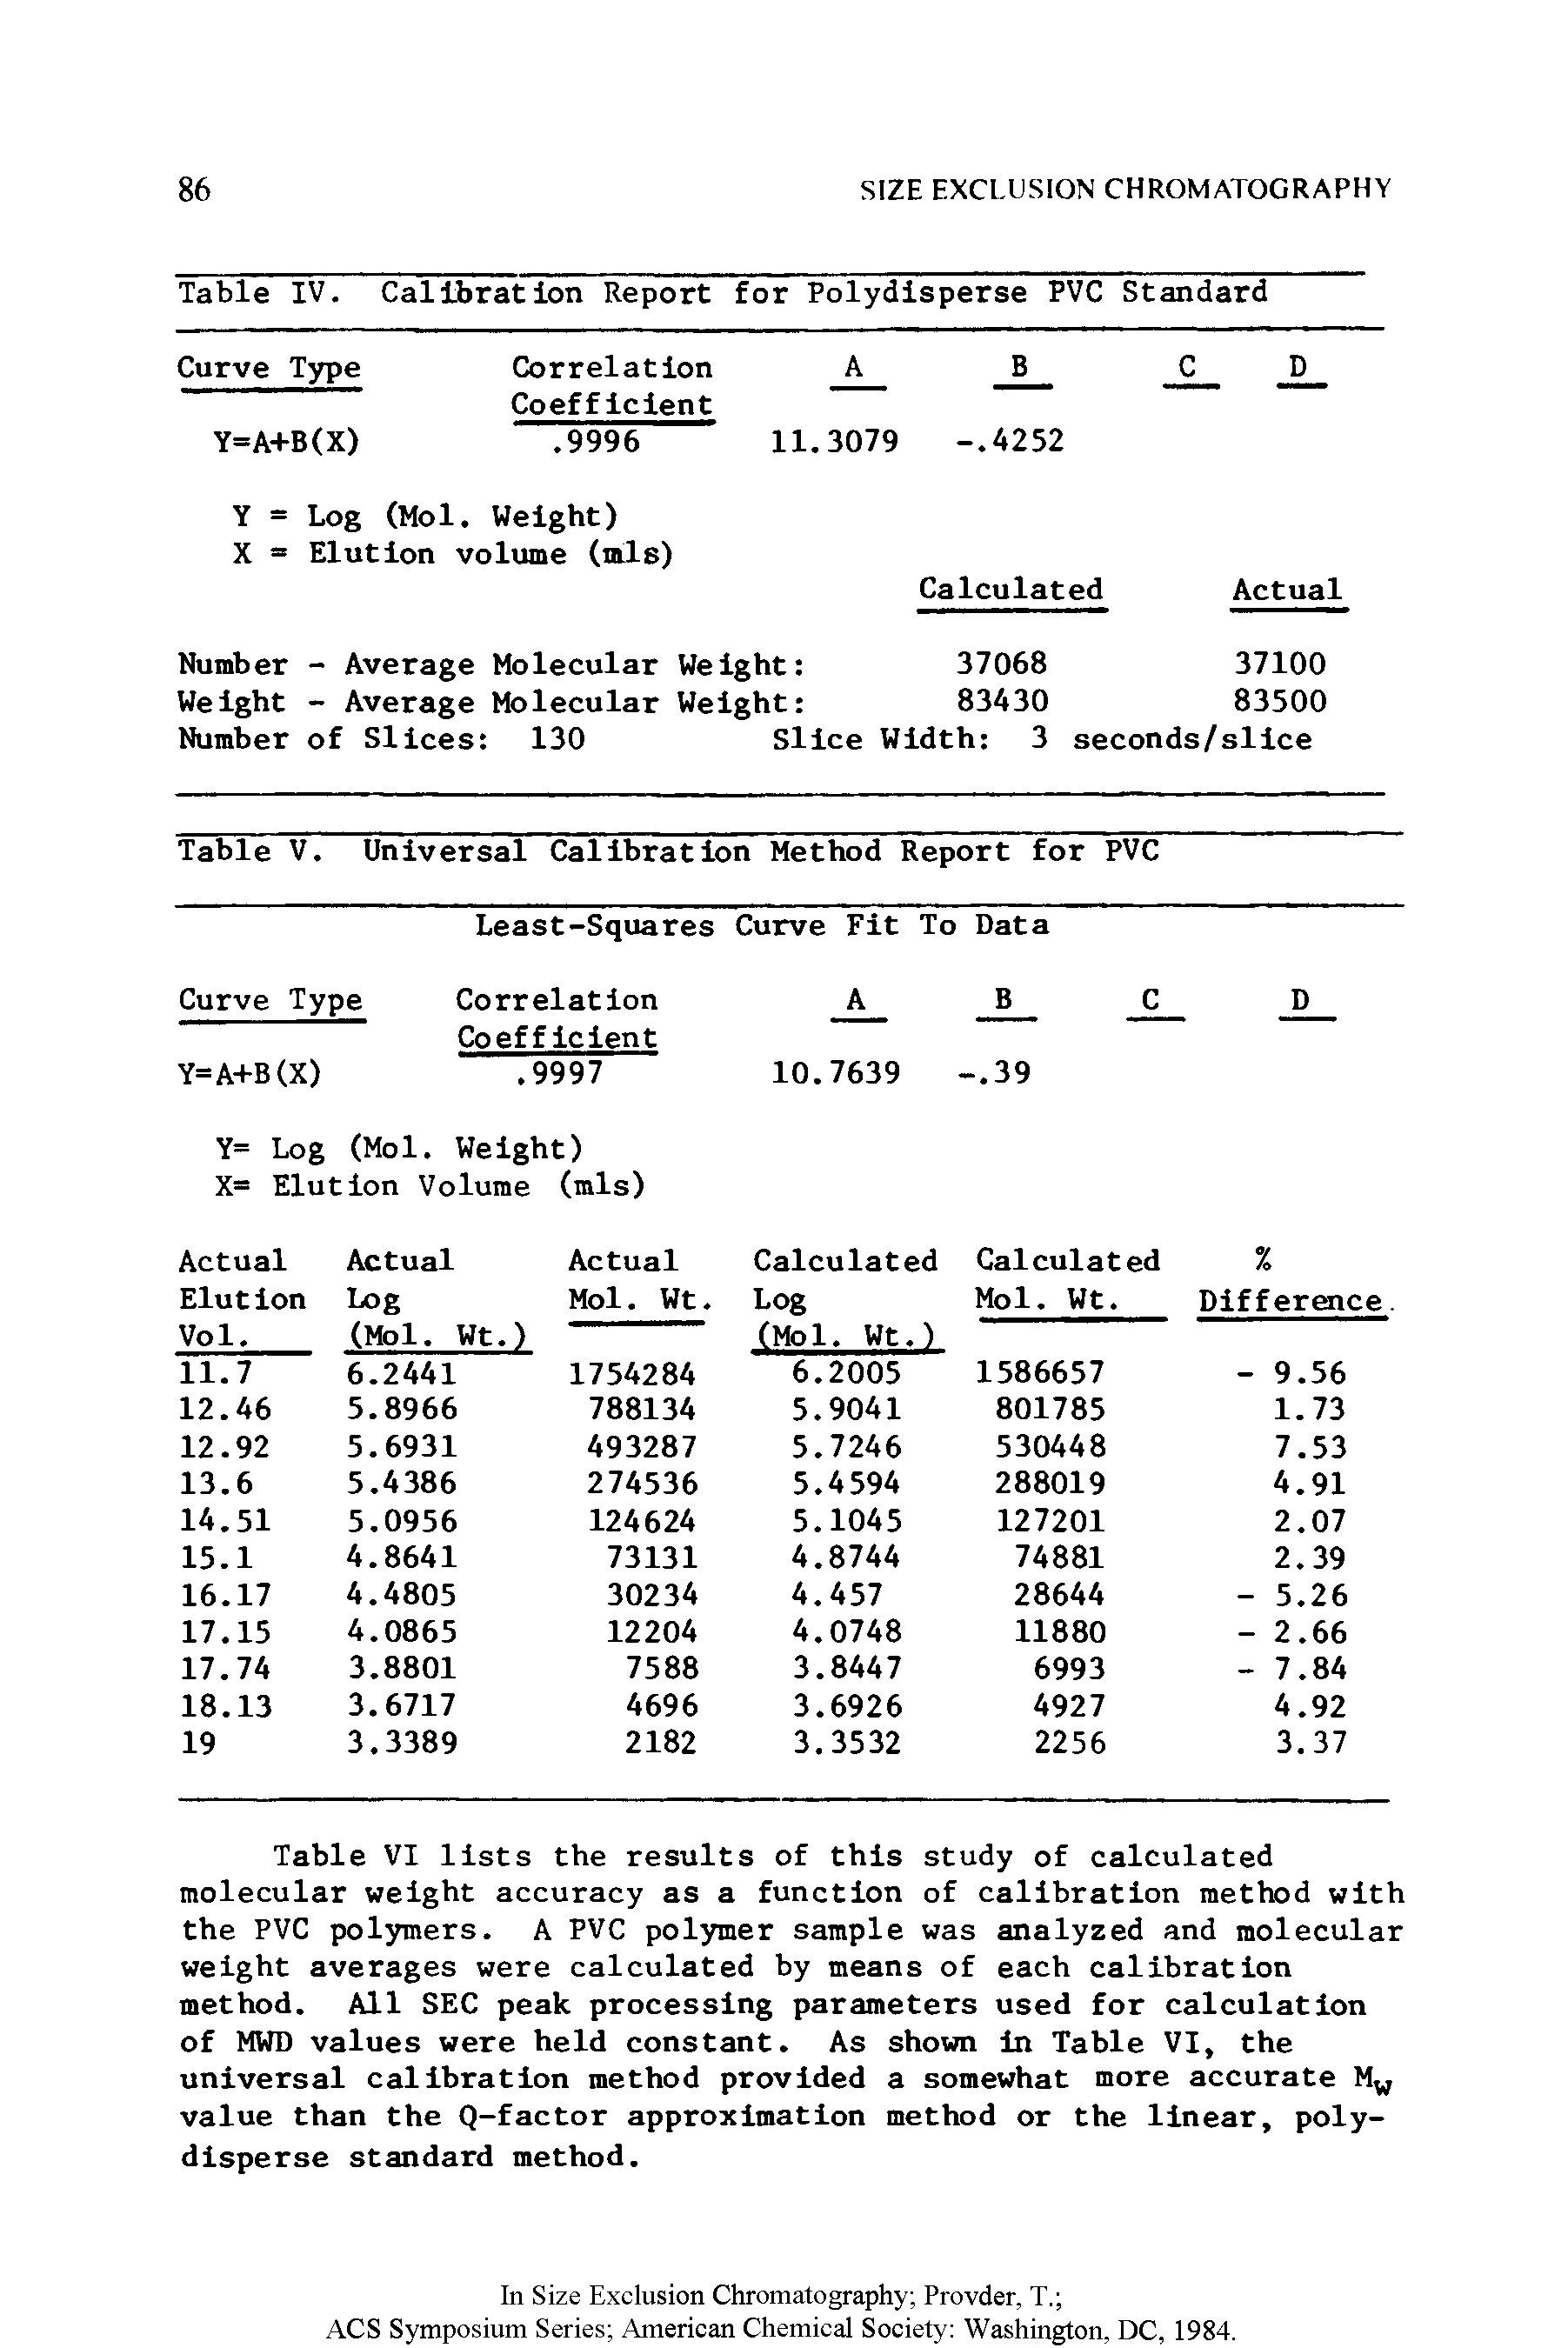 Table VI lists the results of this study of calculated molecular weight accuracy as a function of calibration method with the PVC poljnners. A PVC polymer sample was analyzed and molecular weight averages were calculated by means of each calibration method. All SEC peak processing parameters used for calculation of MWD values were held constant. As shown in Table VI, the universal calibration method provided a somewhat more accurate value than the Q-factor approximation method or the linear, poly-disperse standard method.